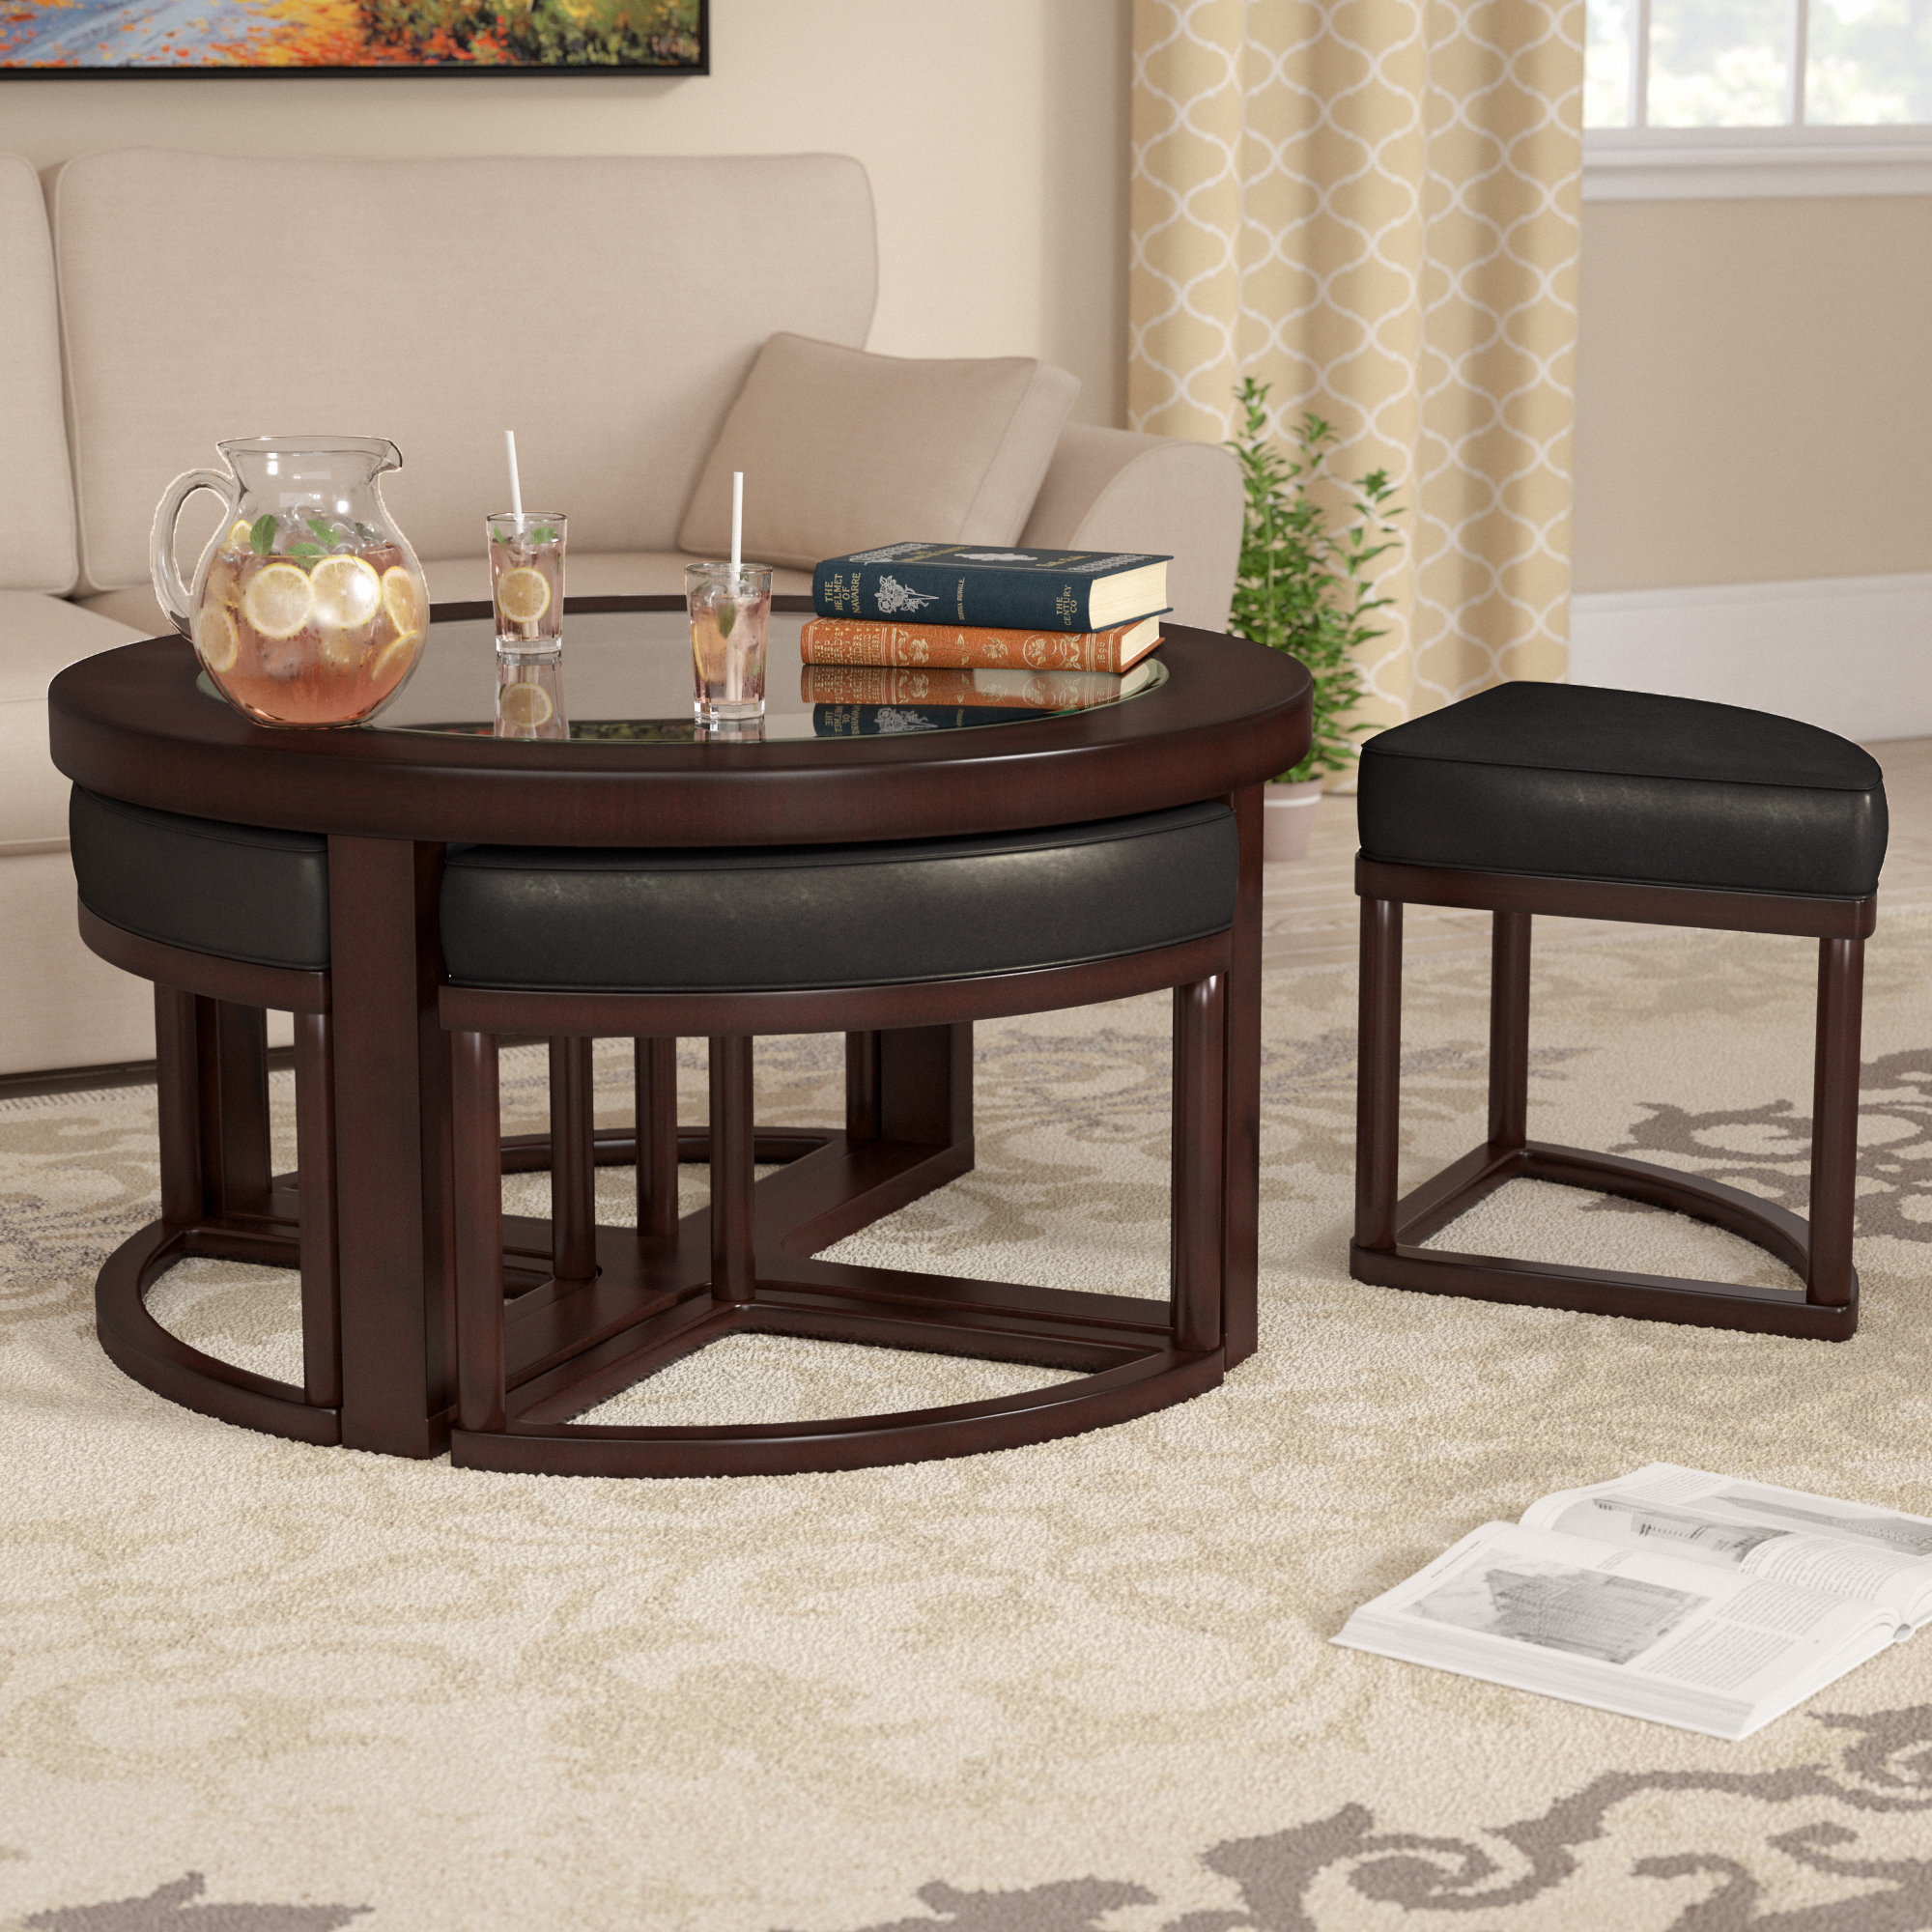 Featured image of post Coffee Table With Seating / It&#039;s great having so many to choose from.